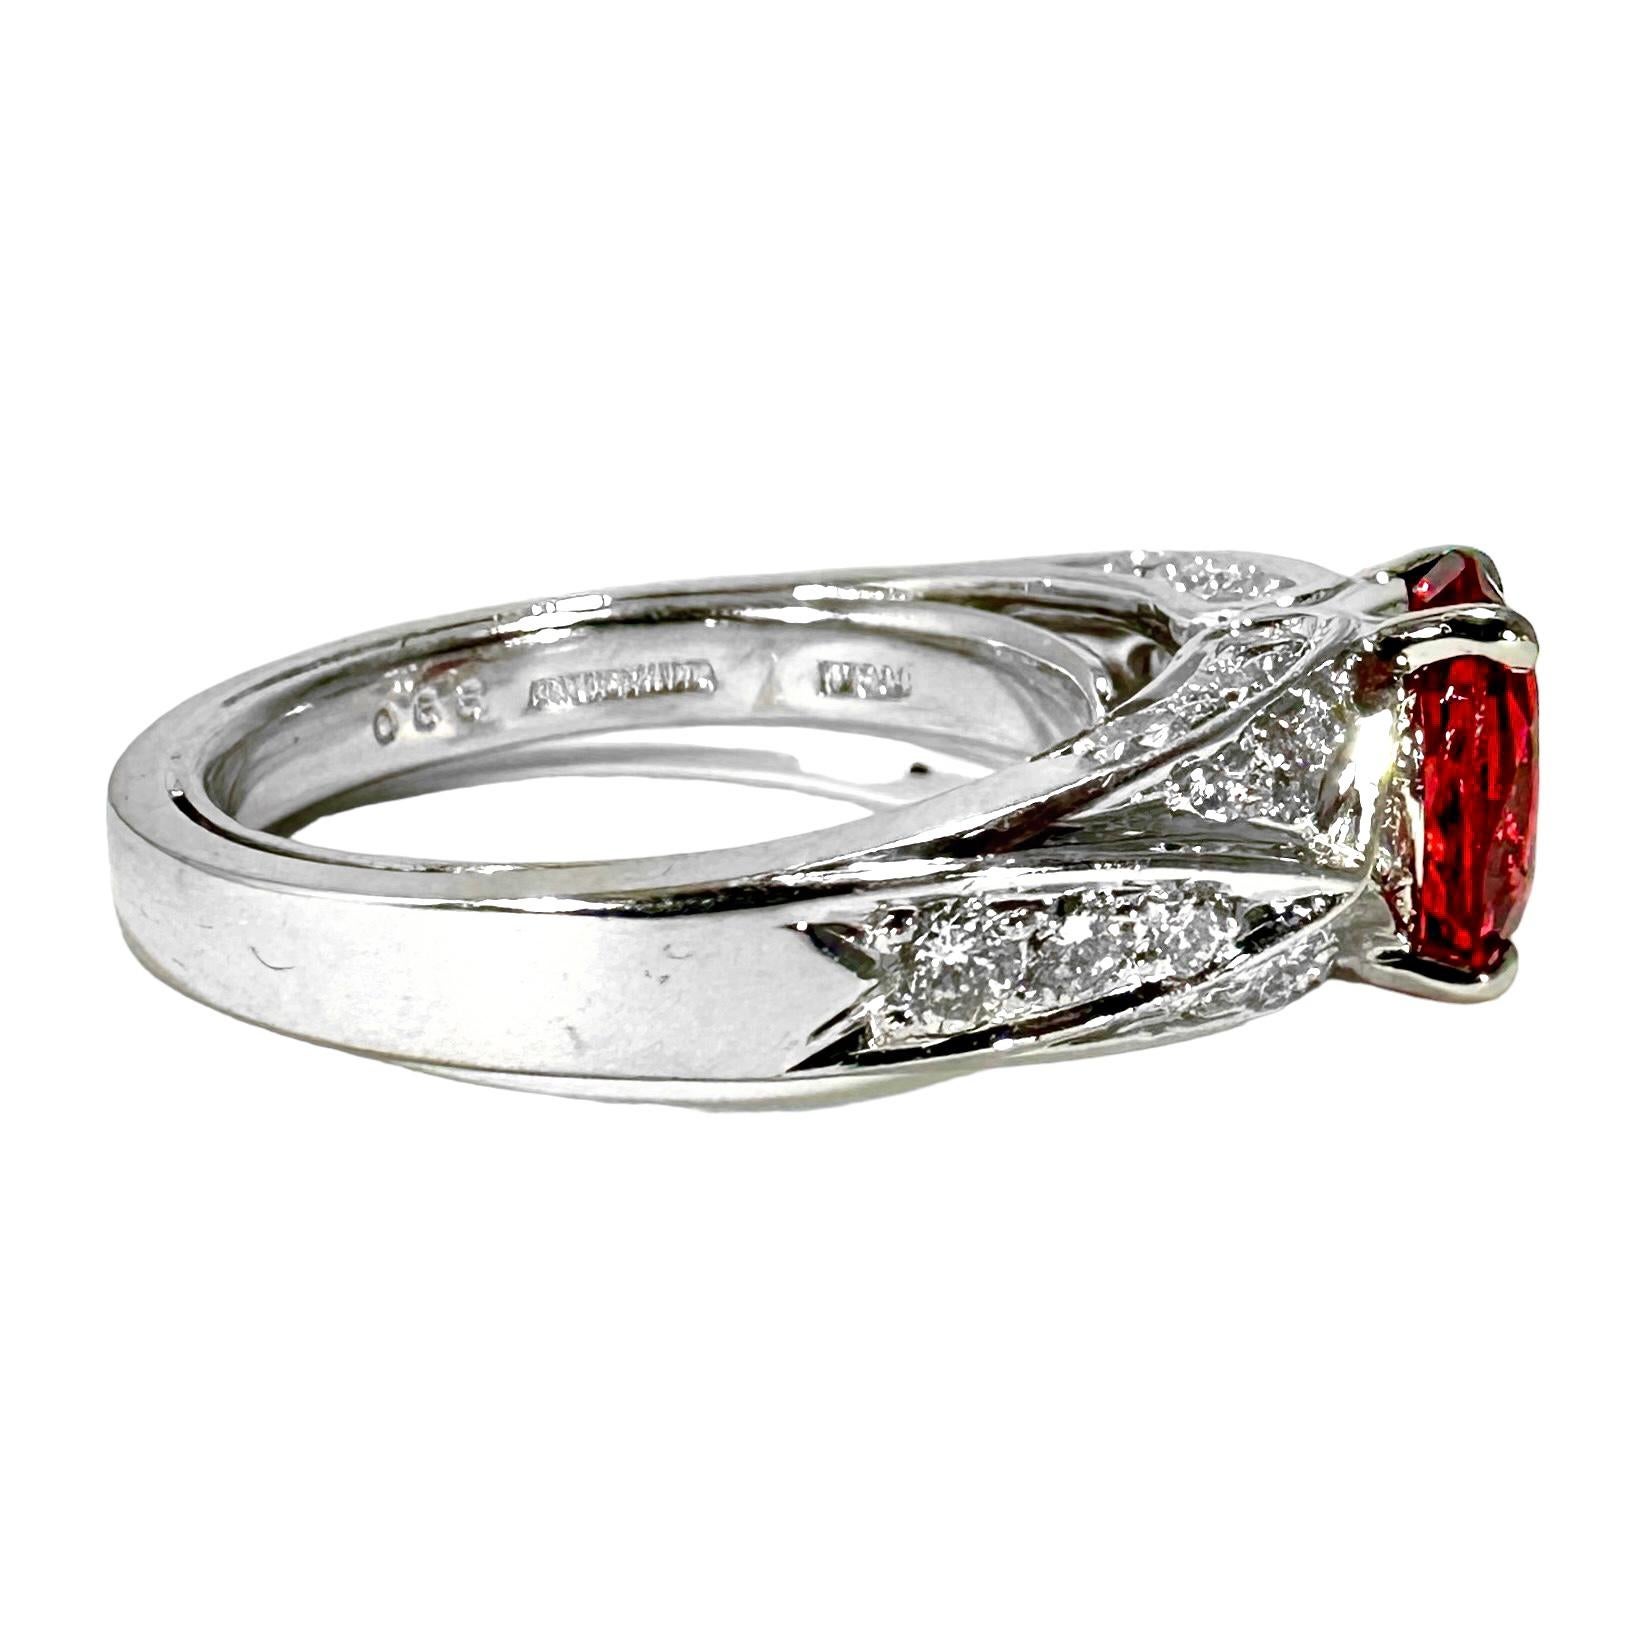 Brilliant Cut Vivid Oval Shaped Orangy-Red Burmese Spinel set in Platinum Ring with Diamonds